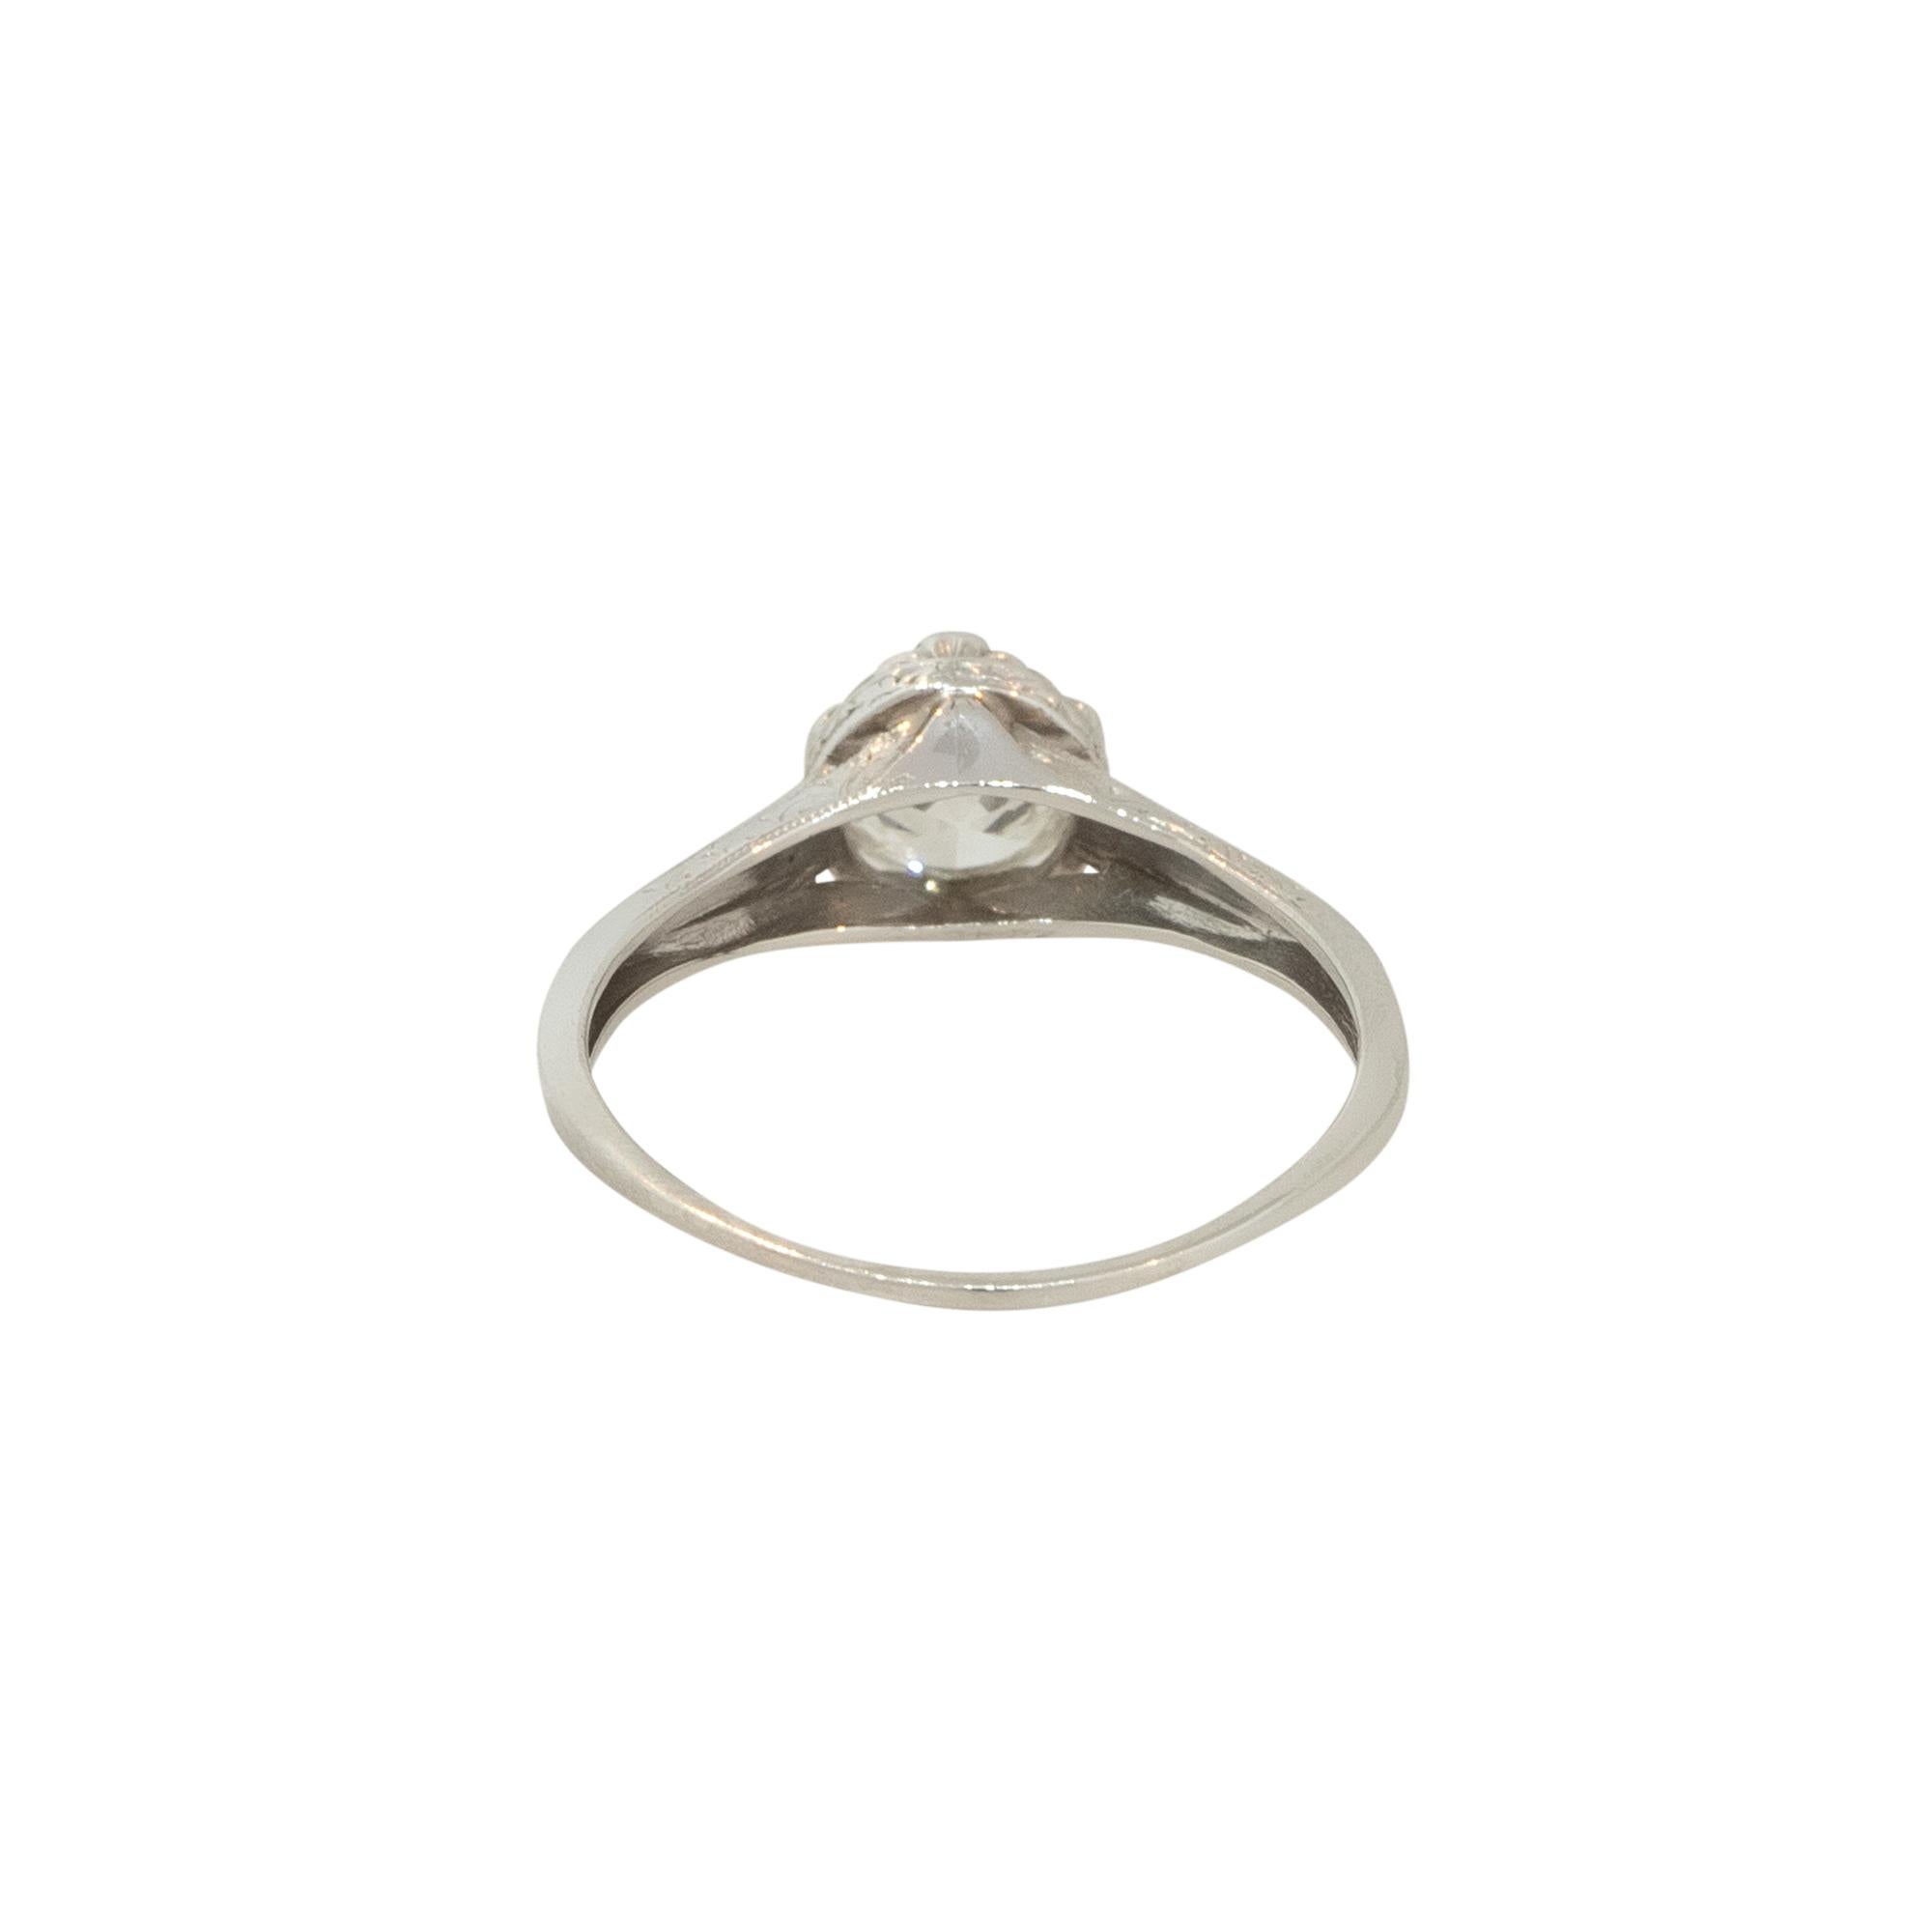 Women's 1.0 Carat Diamond Engagement Ring in Vintage Setting Platinum in Stock For Sale